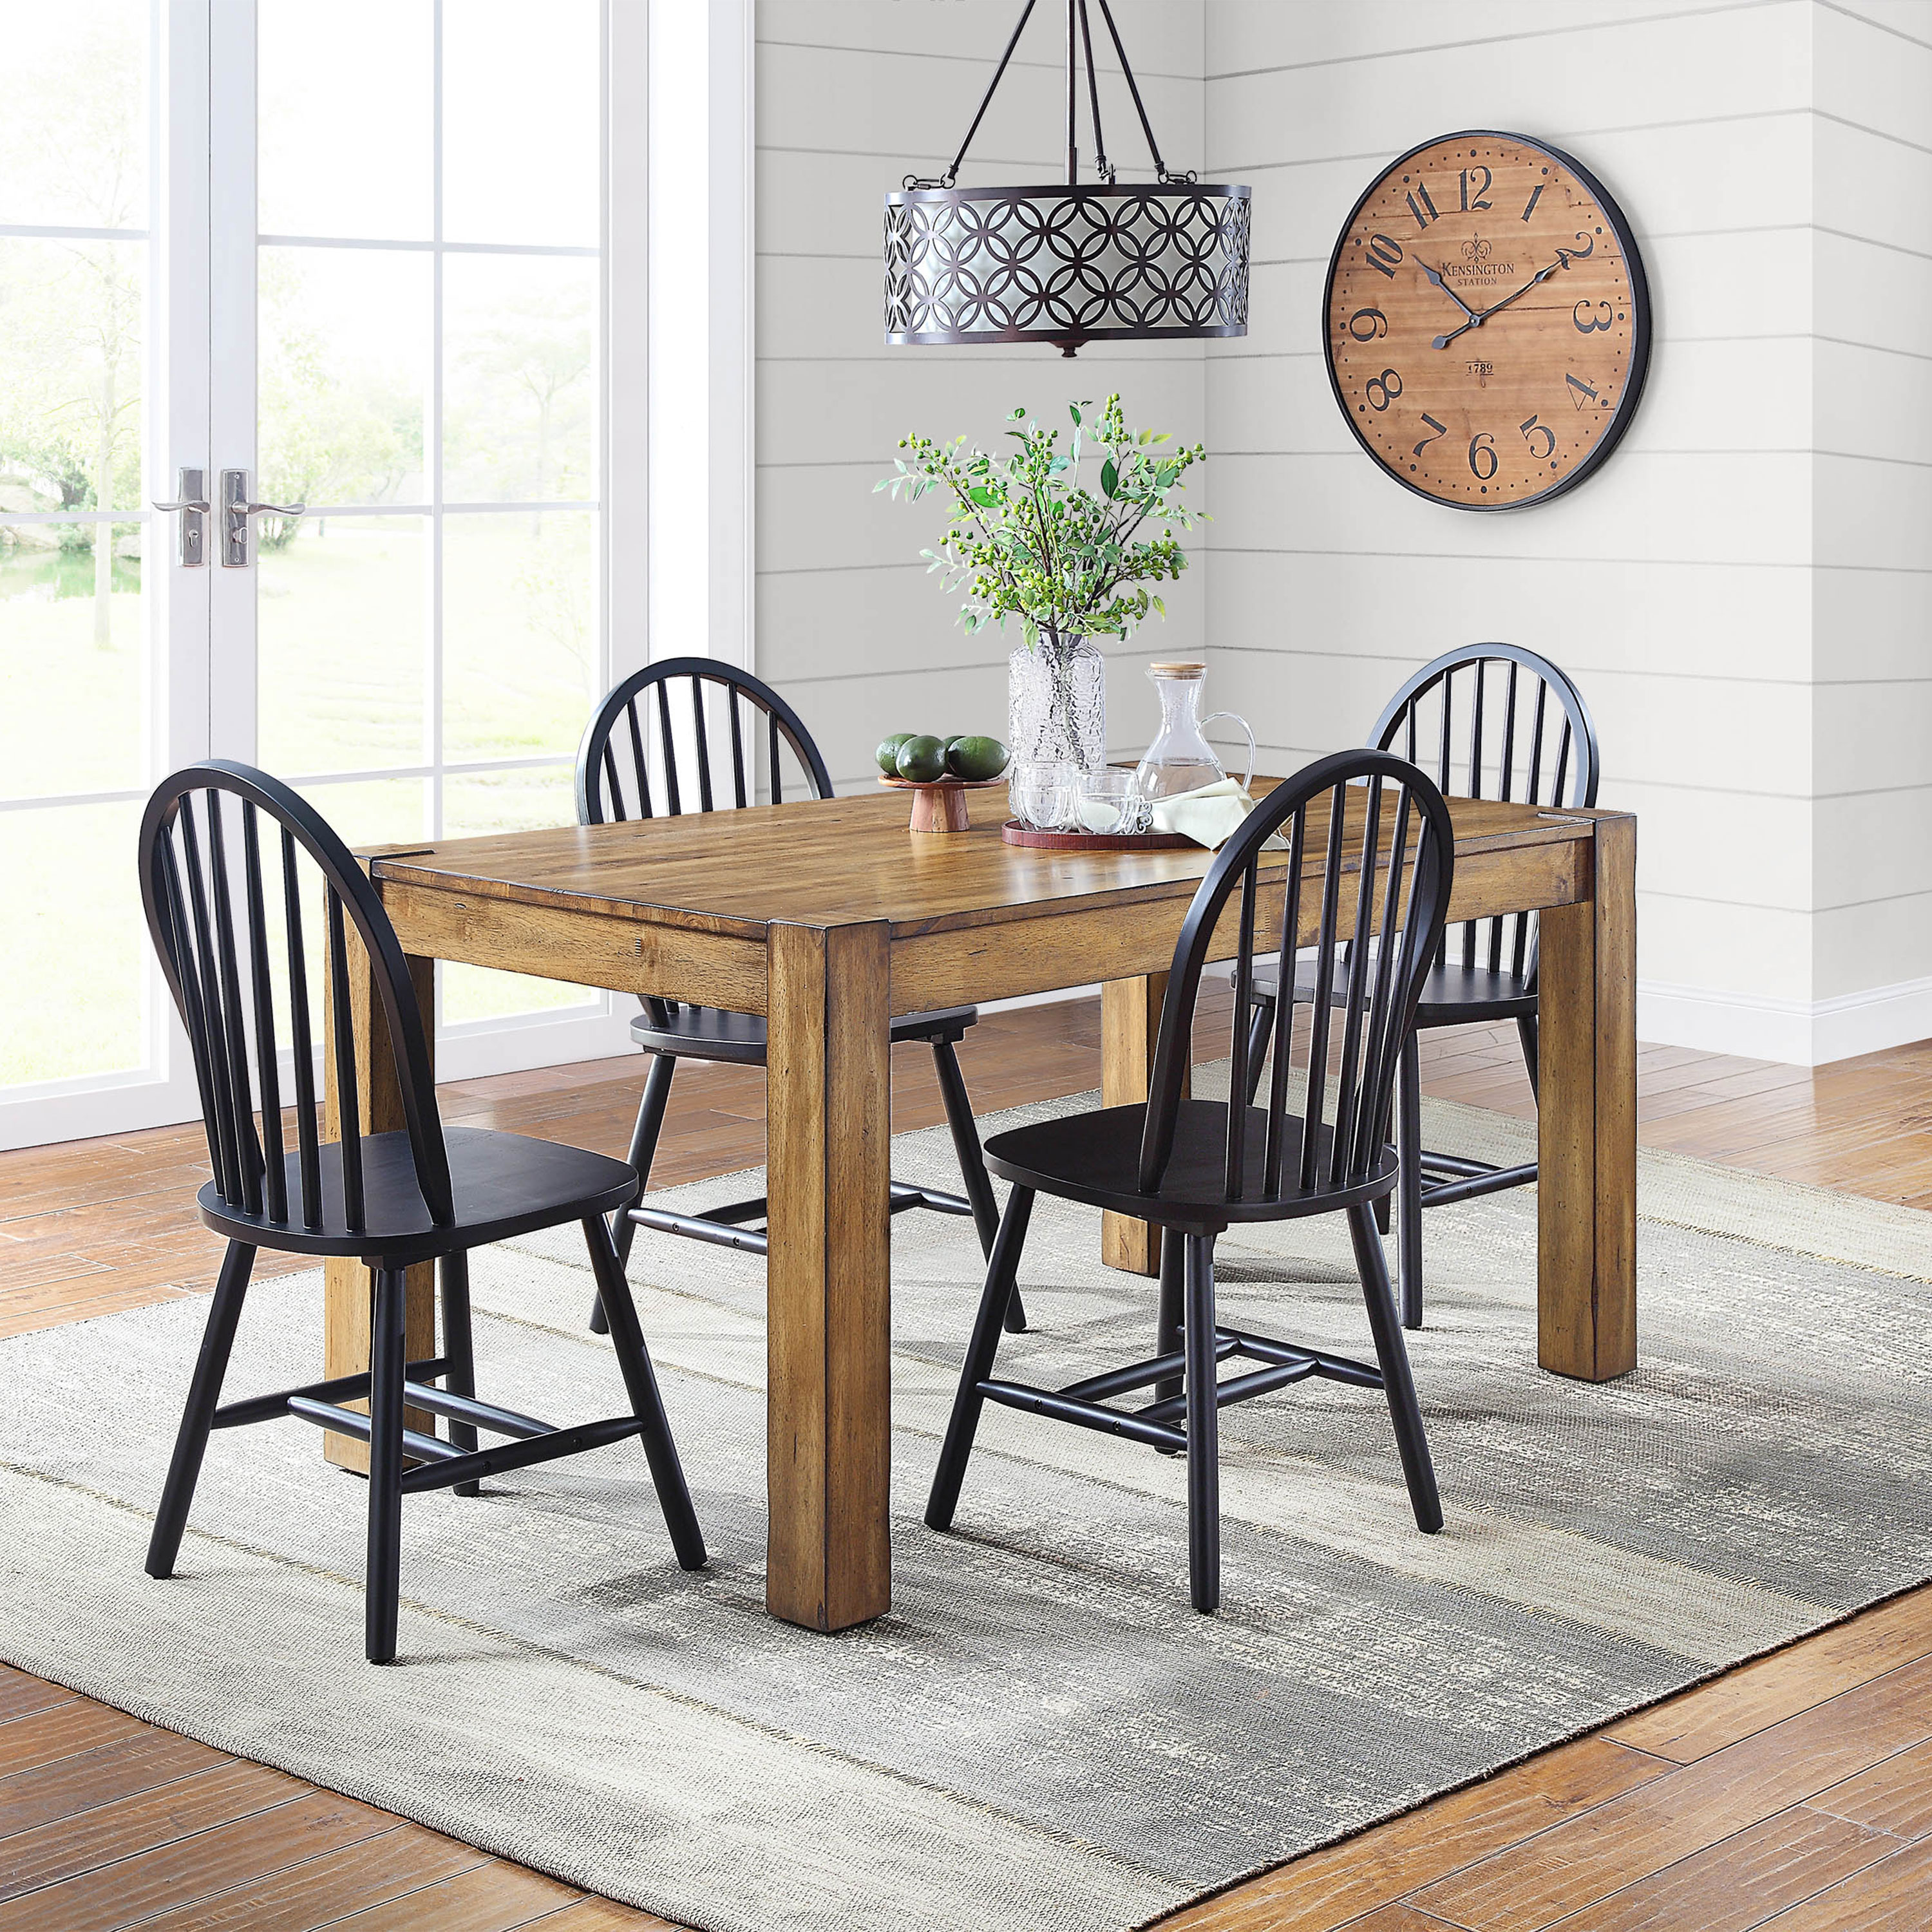 Better Homes and Gardens Autumn Lane Windsor Solid Wood Dining Chairs, Set of 2, Black Finish - image 4 of 10